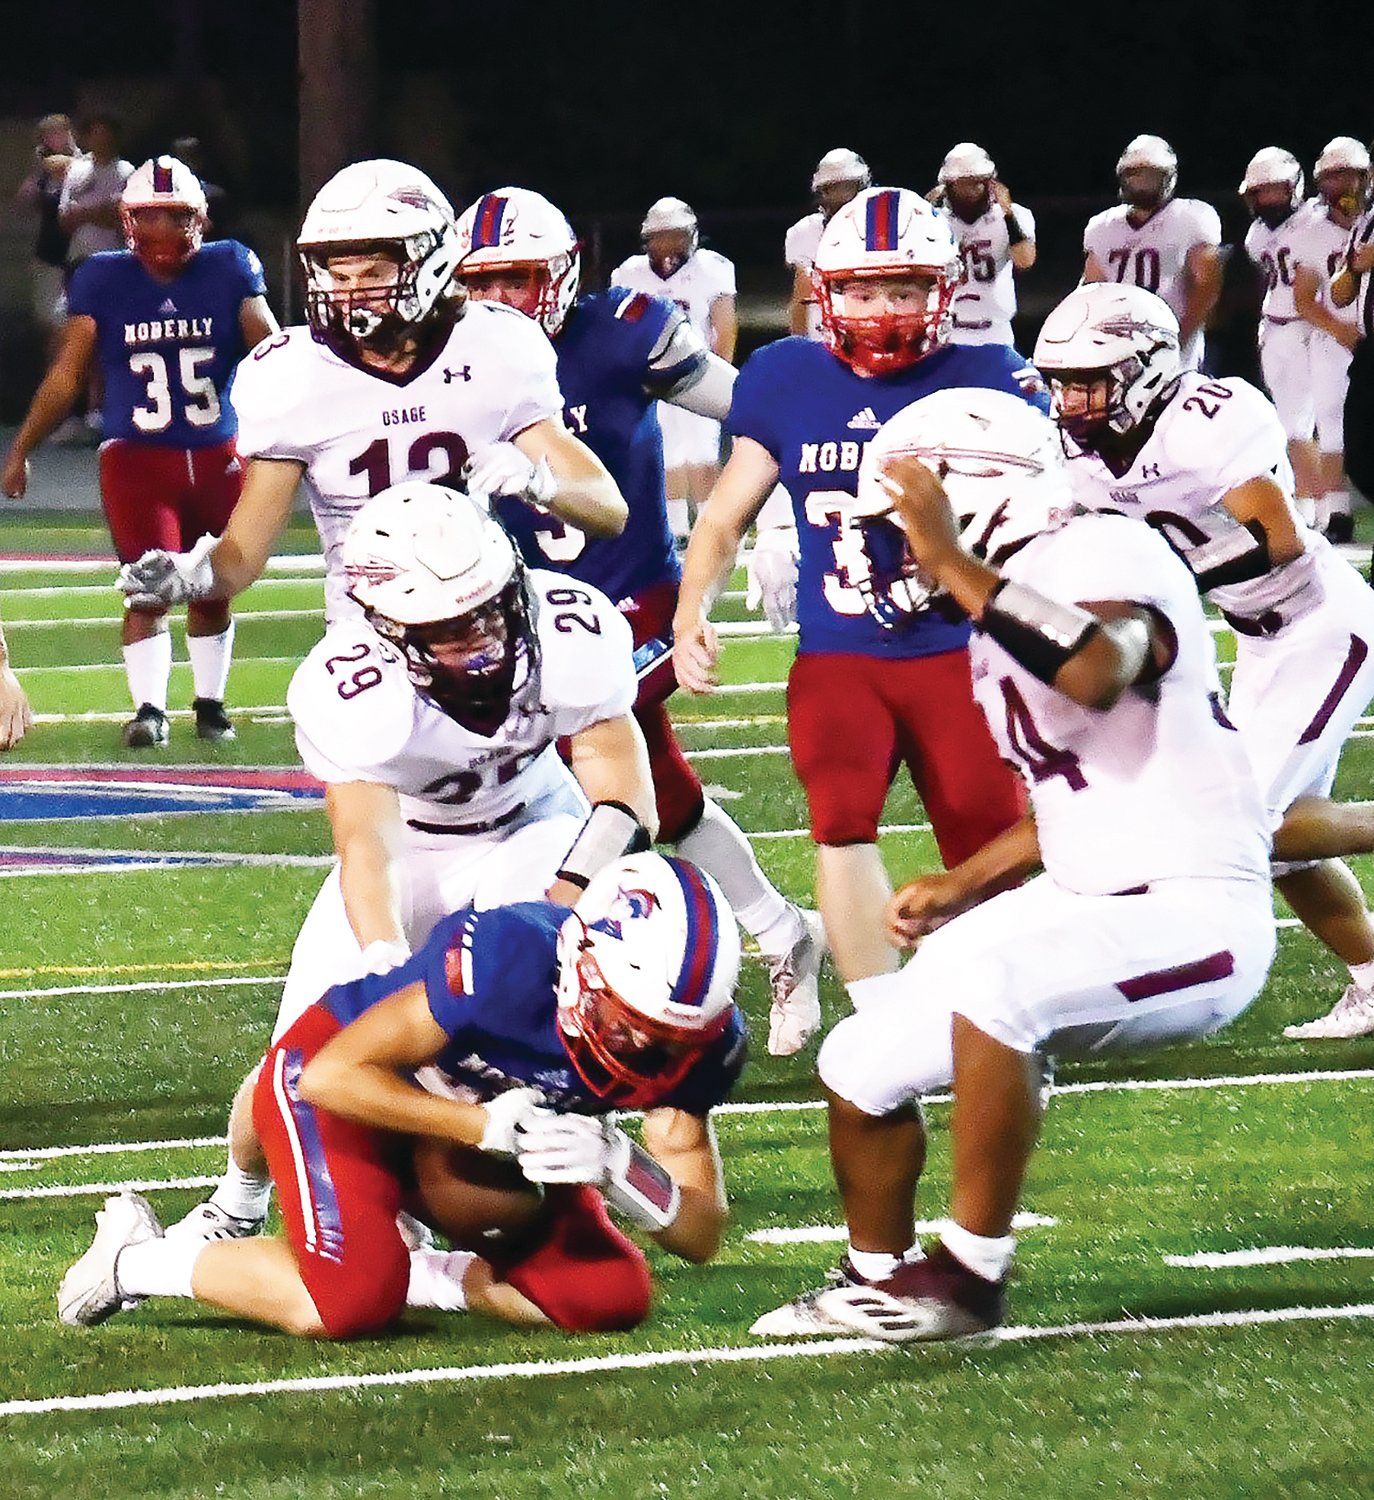 Moberly’s Hunter Boots (blue jersey) gathers in Javaughn Briscoe’s squib kick to begin the second half of a Friday, Sept. 2 game versus Osage. Boots alertly read how the ball bounced, much to the surprise of the Indians’ kick return unit.